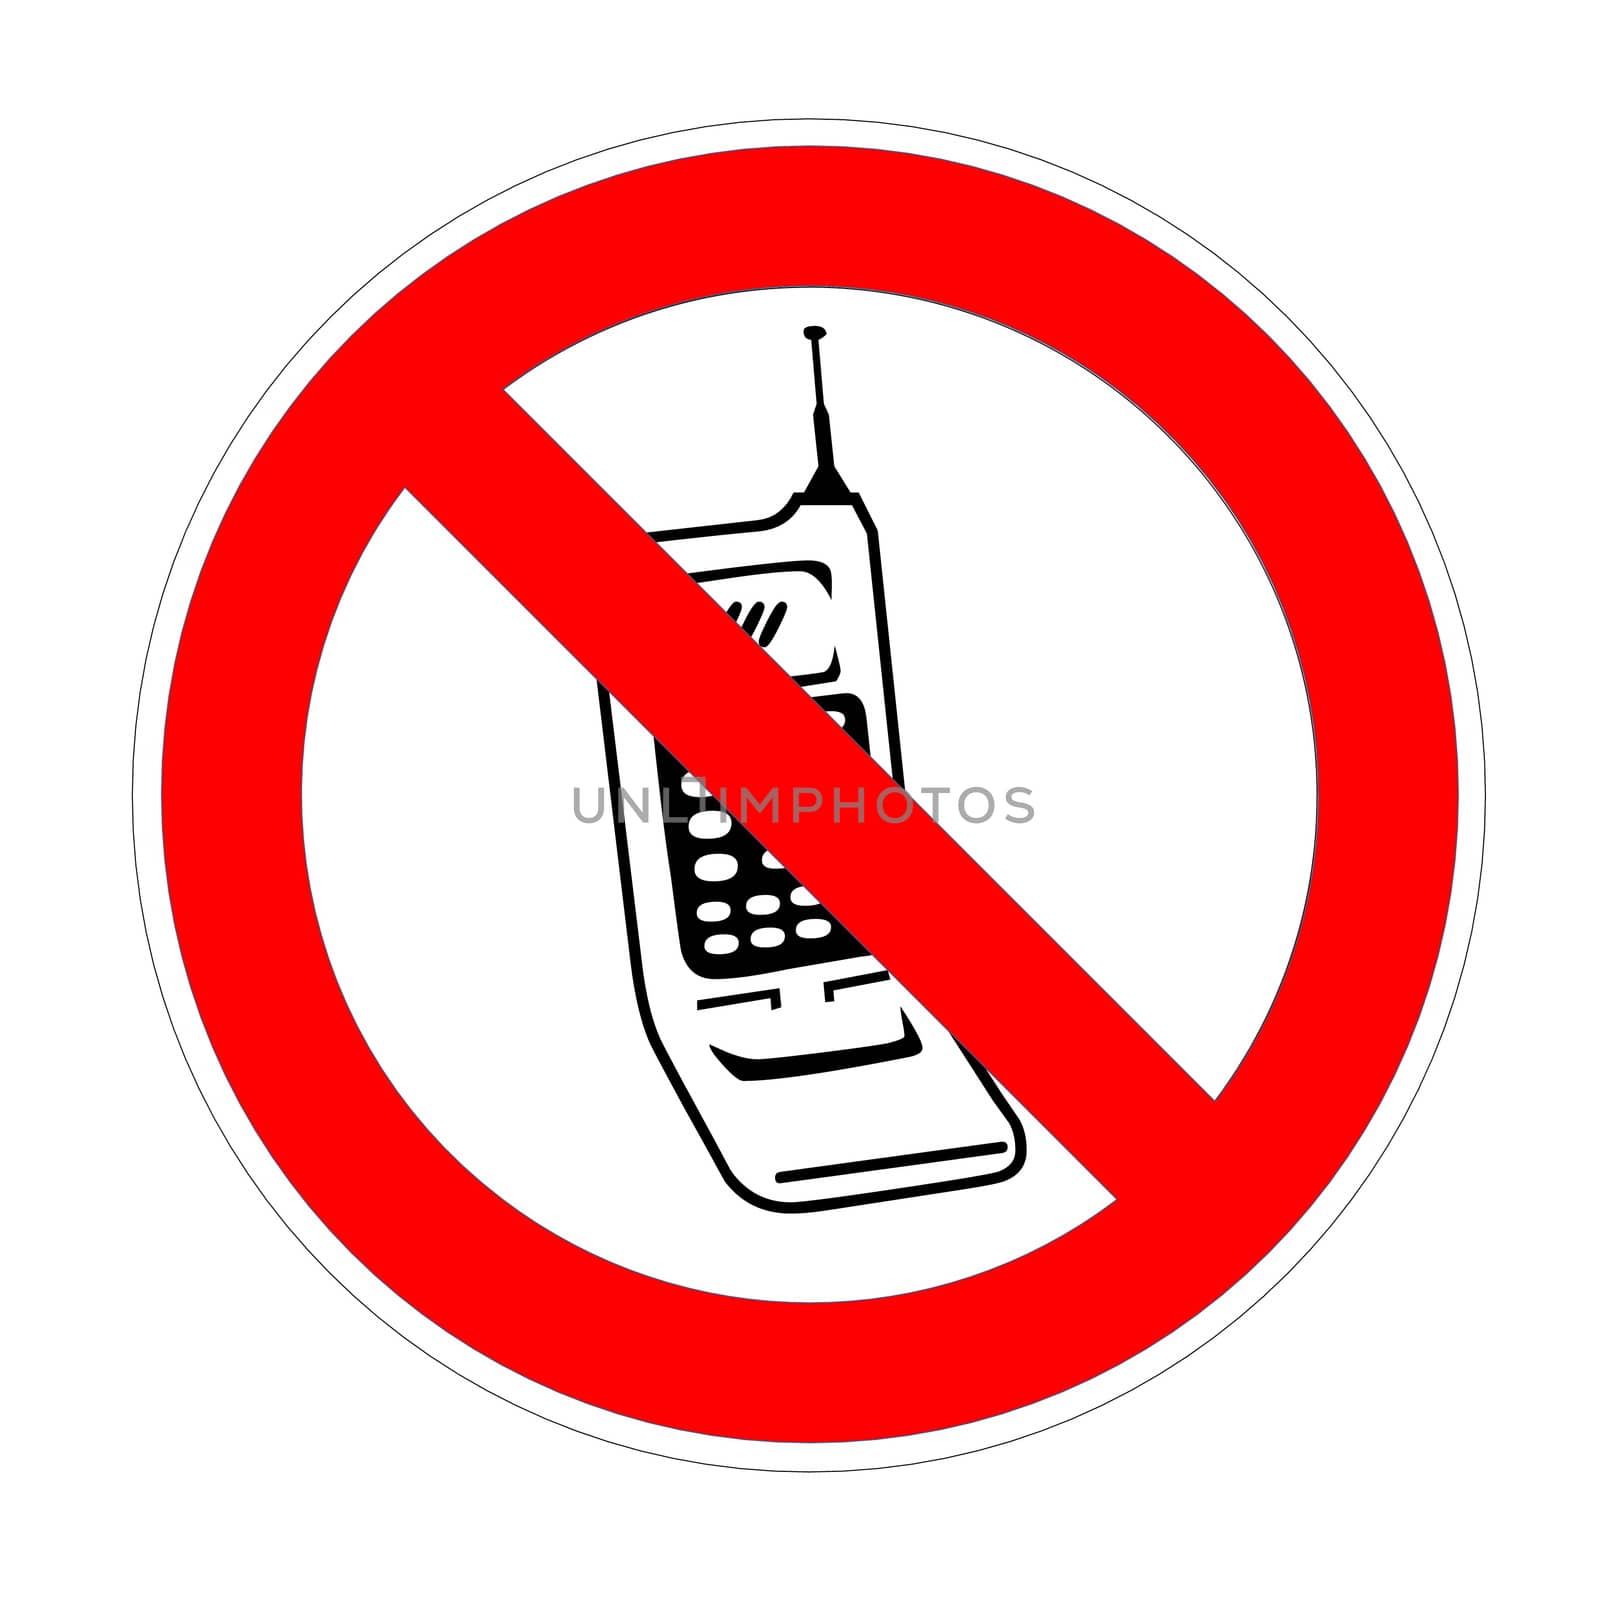 No phone allowed sign on white background